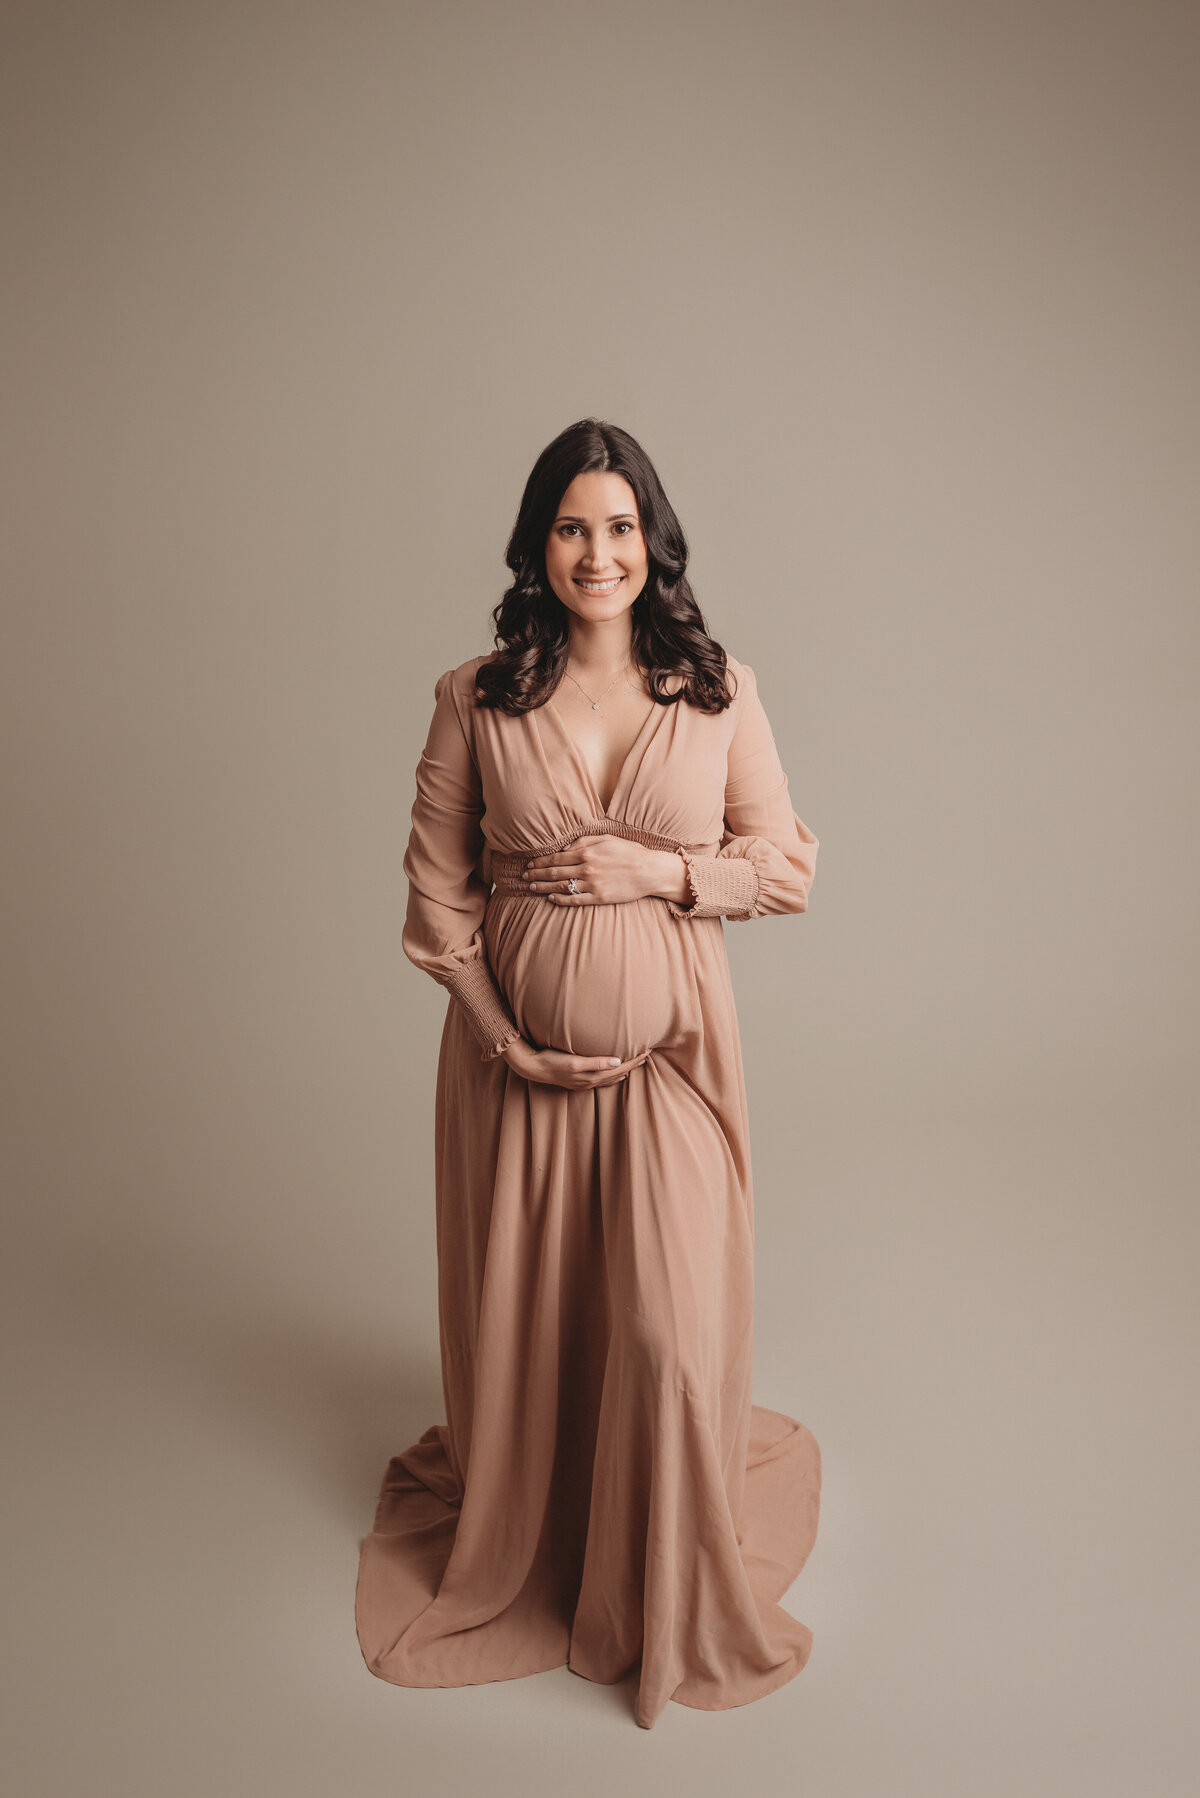 30 week pregnant woman wearing mauve long sleeve gown holding baby bump looking at camera